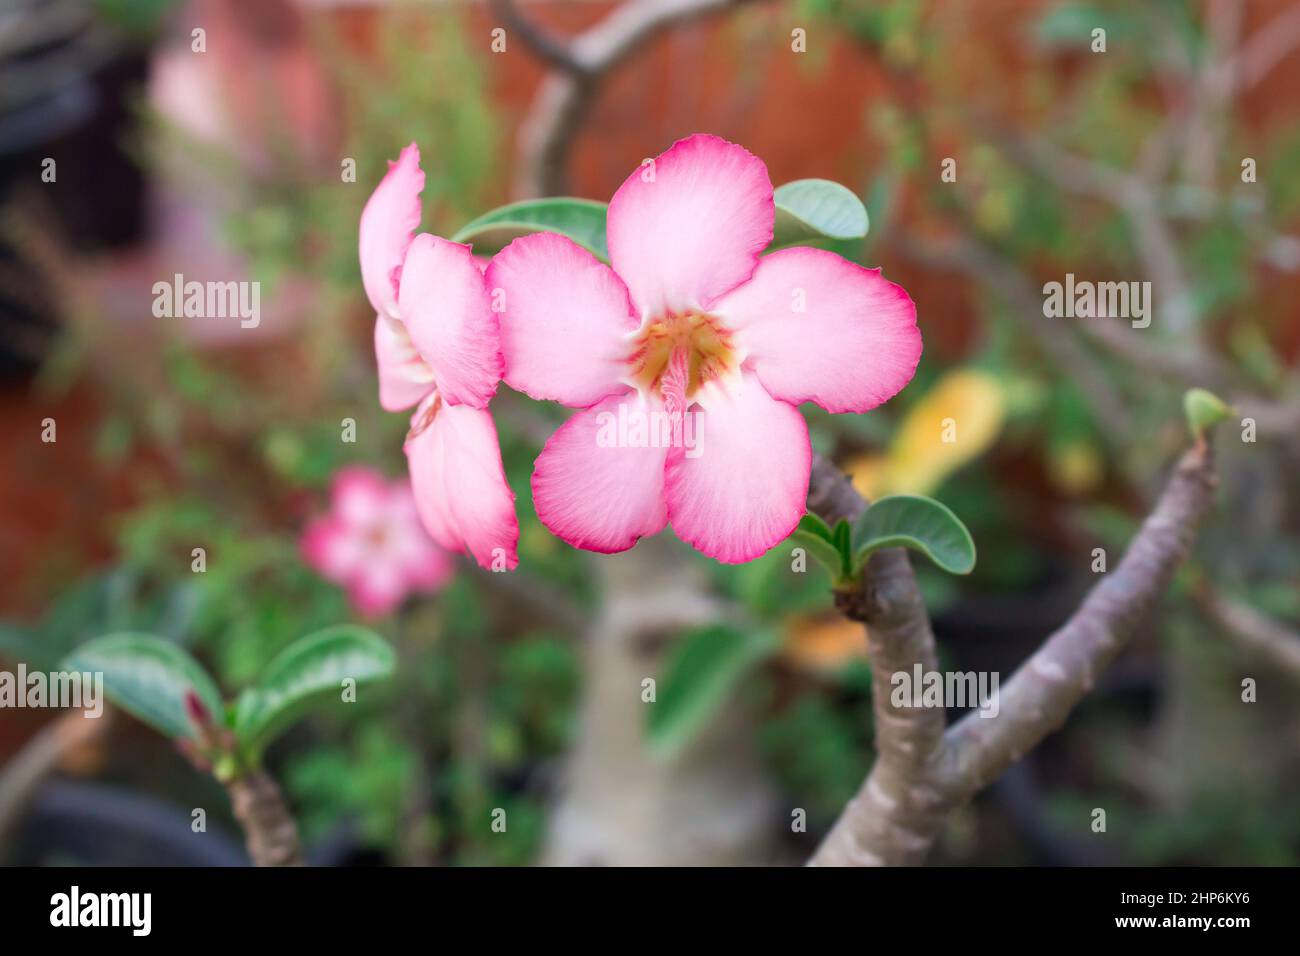 Flowers of an azalea of salmon color close up Stock Photo